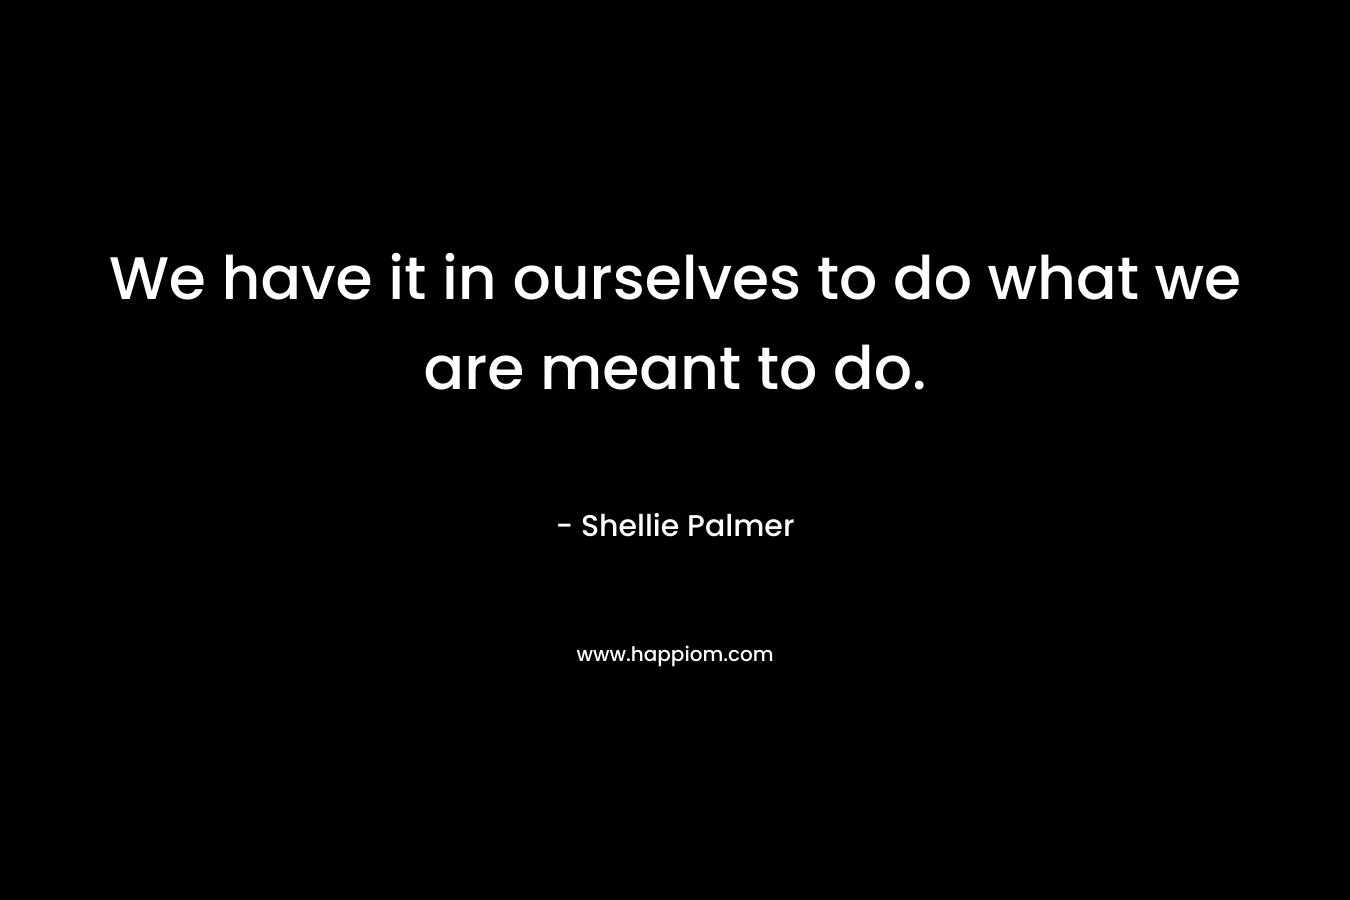 We have it in ourselves to do what we are meant to do. – Shellie Palmer